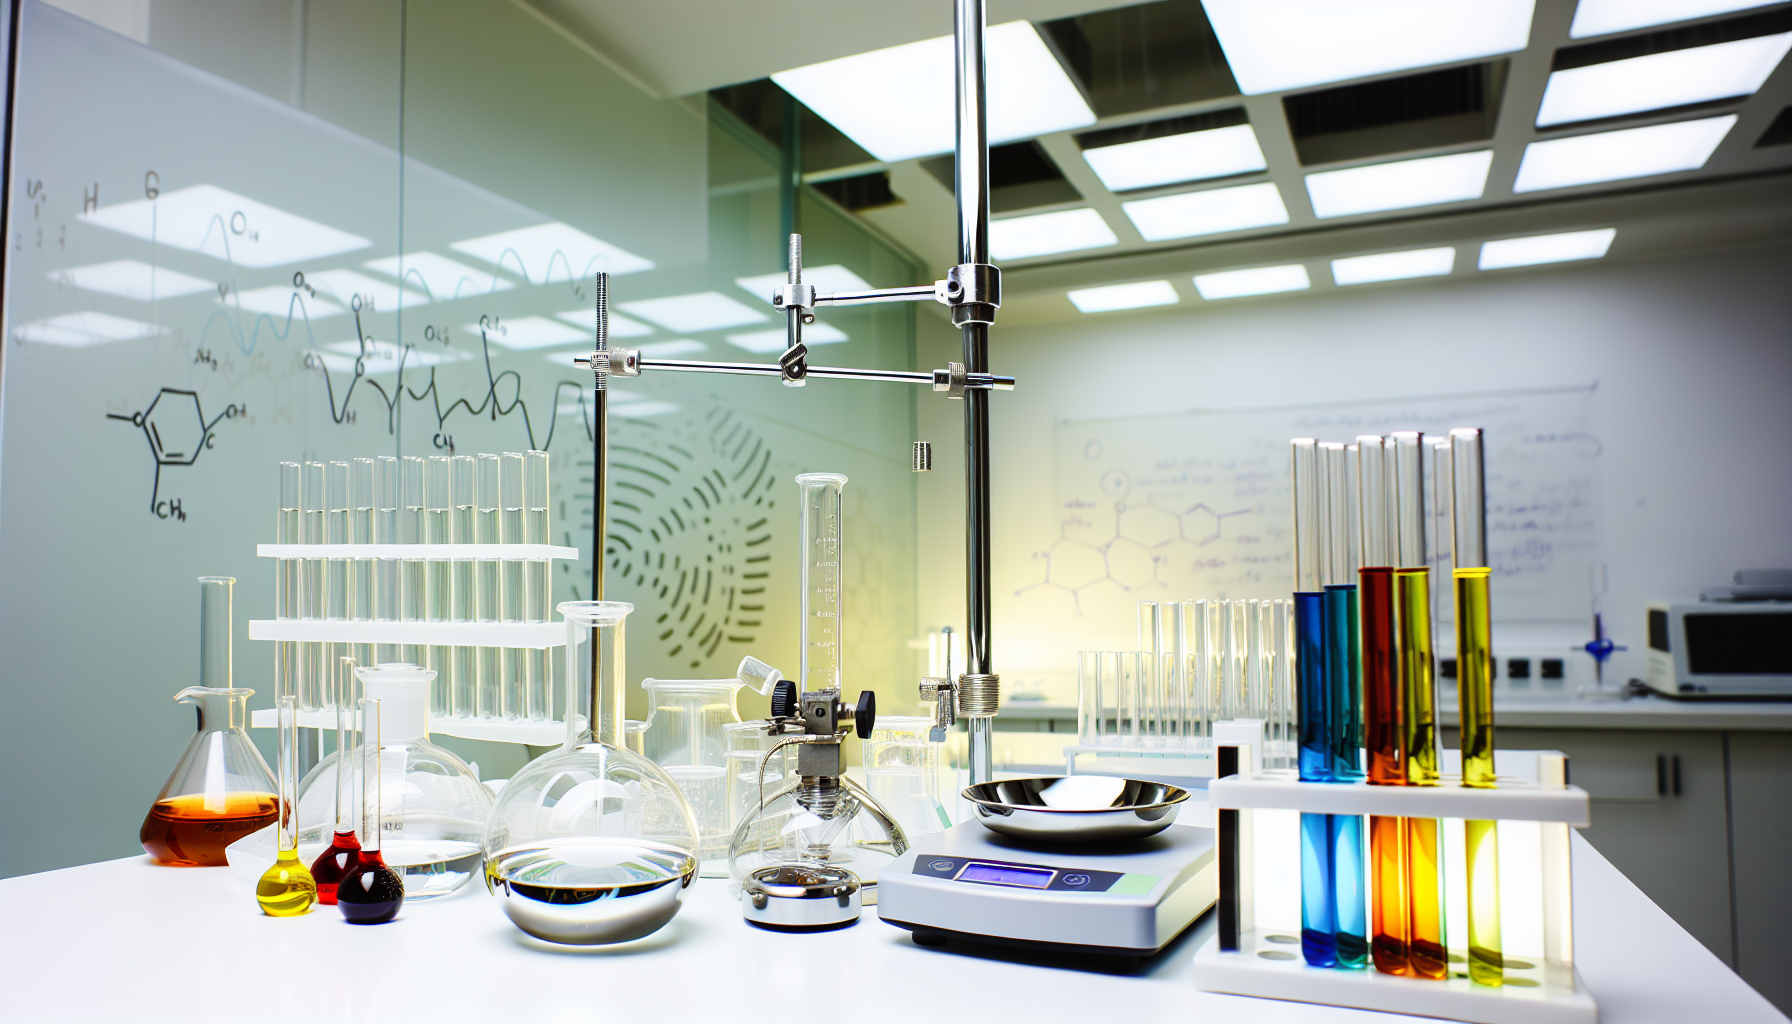 Various chemistry lab equipment including test tubes, Bunsen burners, and analytical balances